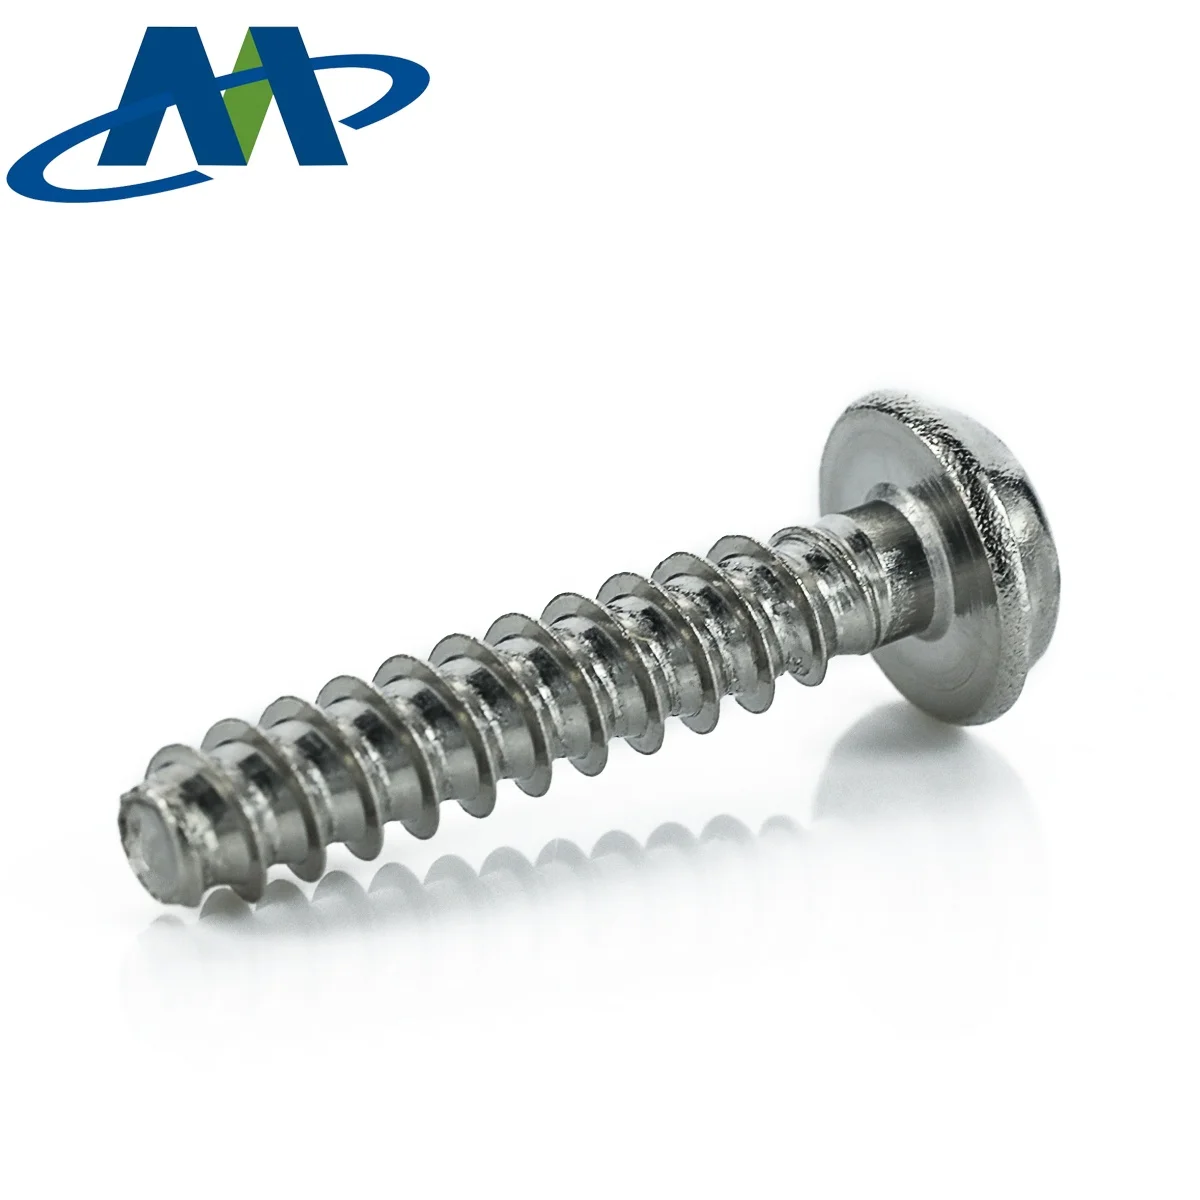 polyplast-pozi-pan-self-tapping-thread-forming-screws-for-use-in-thermo